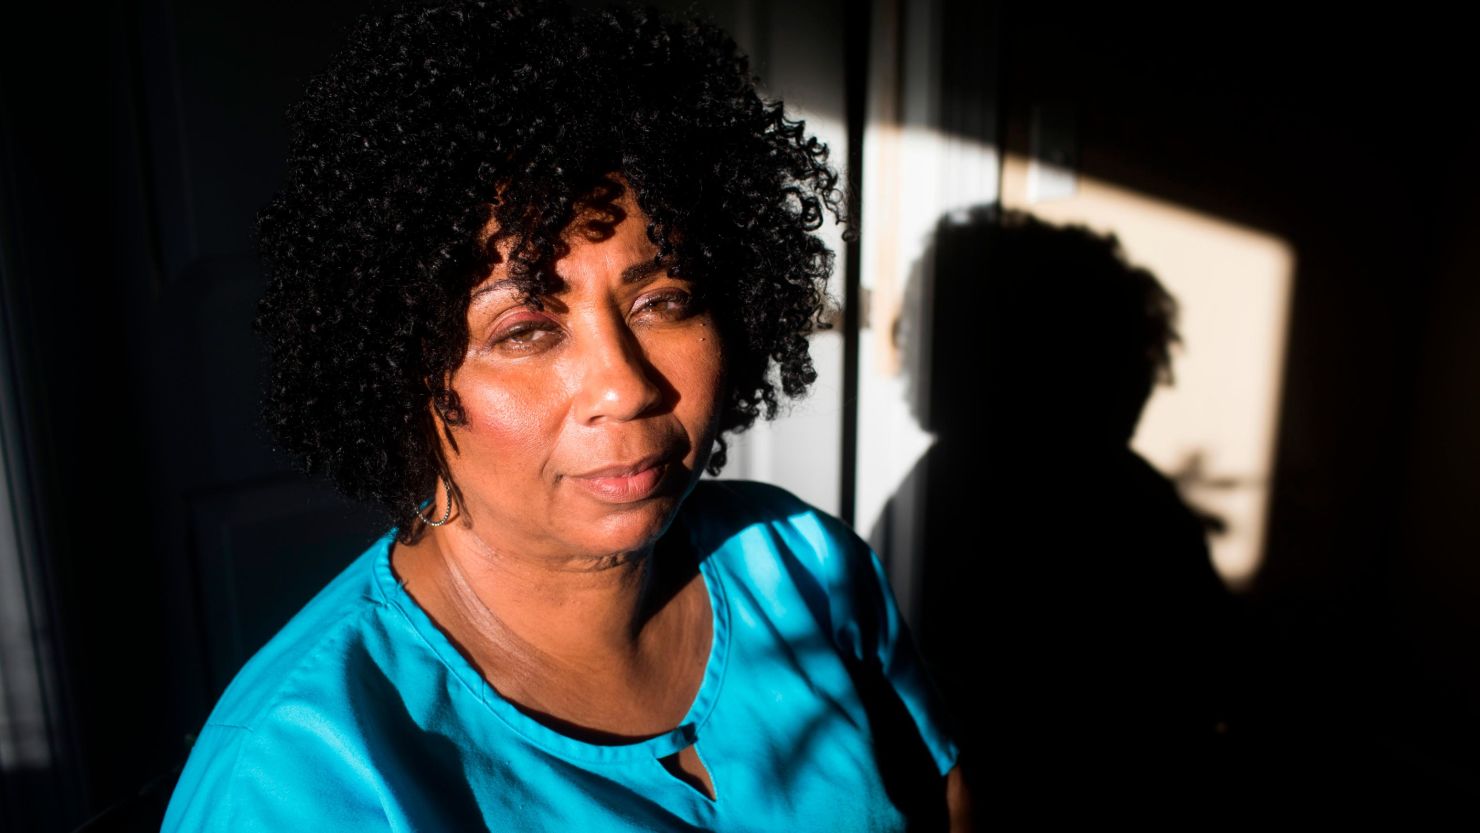 Sherry Johnson kept silent about her forced marriage at age 11 and the abuse she suffered in her youth. But now she has become the face of Florida's efforts to ban child marriage.